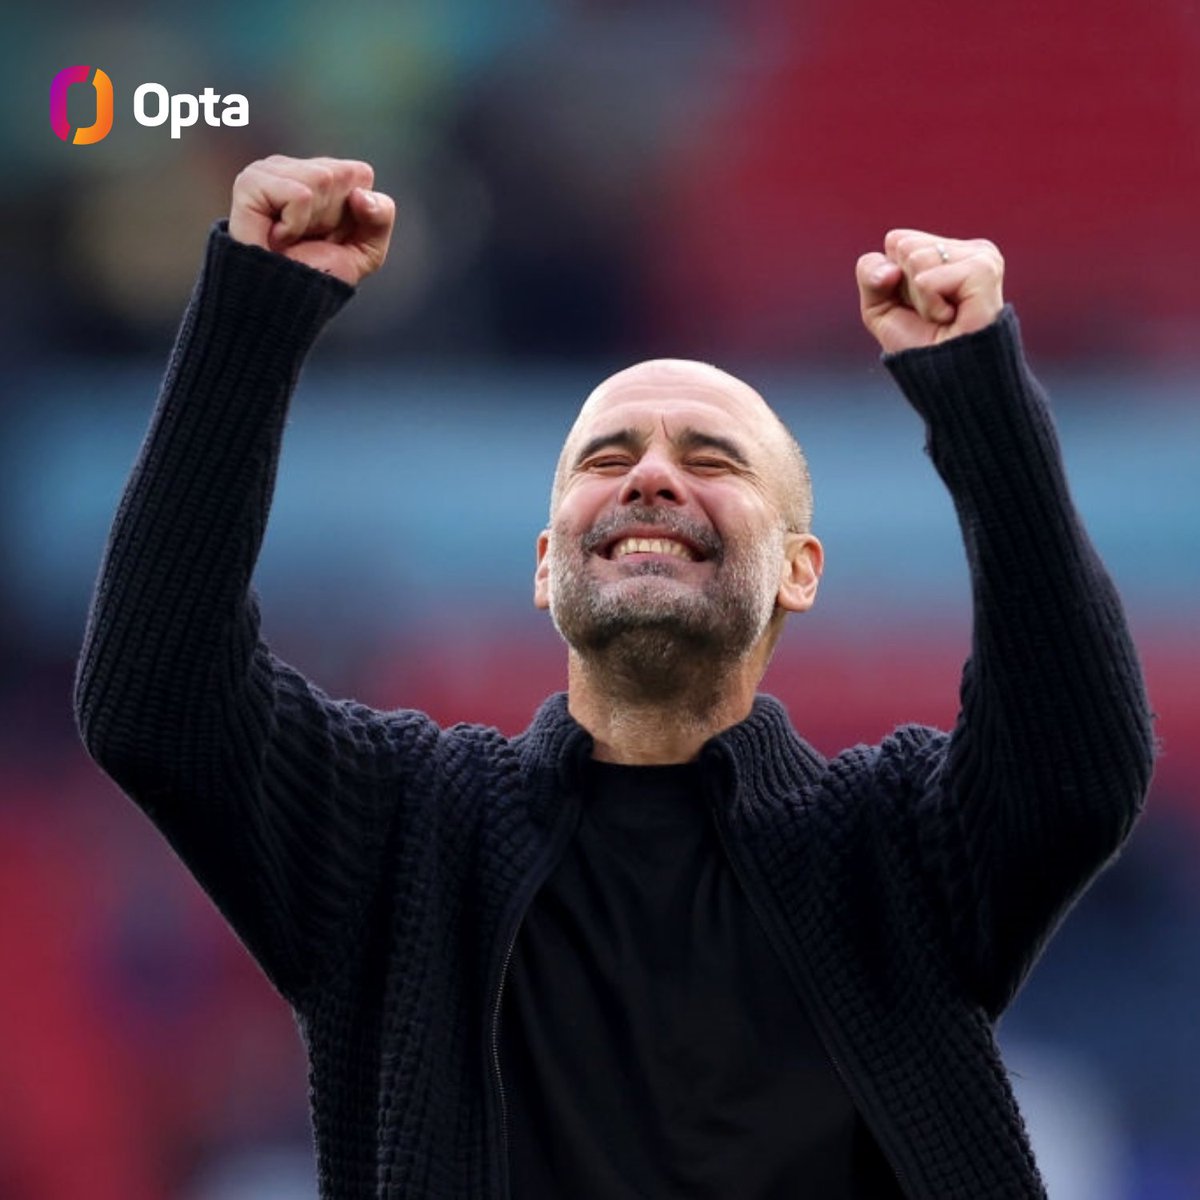 3 & 11 - Man City have reached the FA Cup final in consecutive years for a third time, while Chelsea have suffered their 11th elimination from the FA Cup at the semi-final stage, the third most in the competition’s history after Everton (13) and Tottenham (12). Showcase.